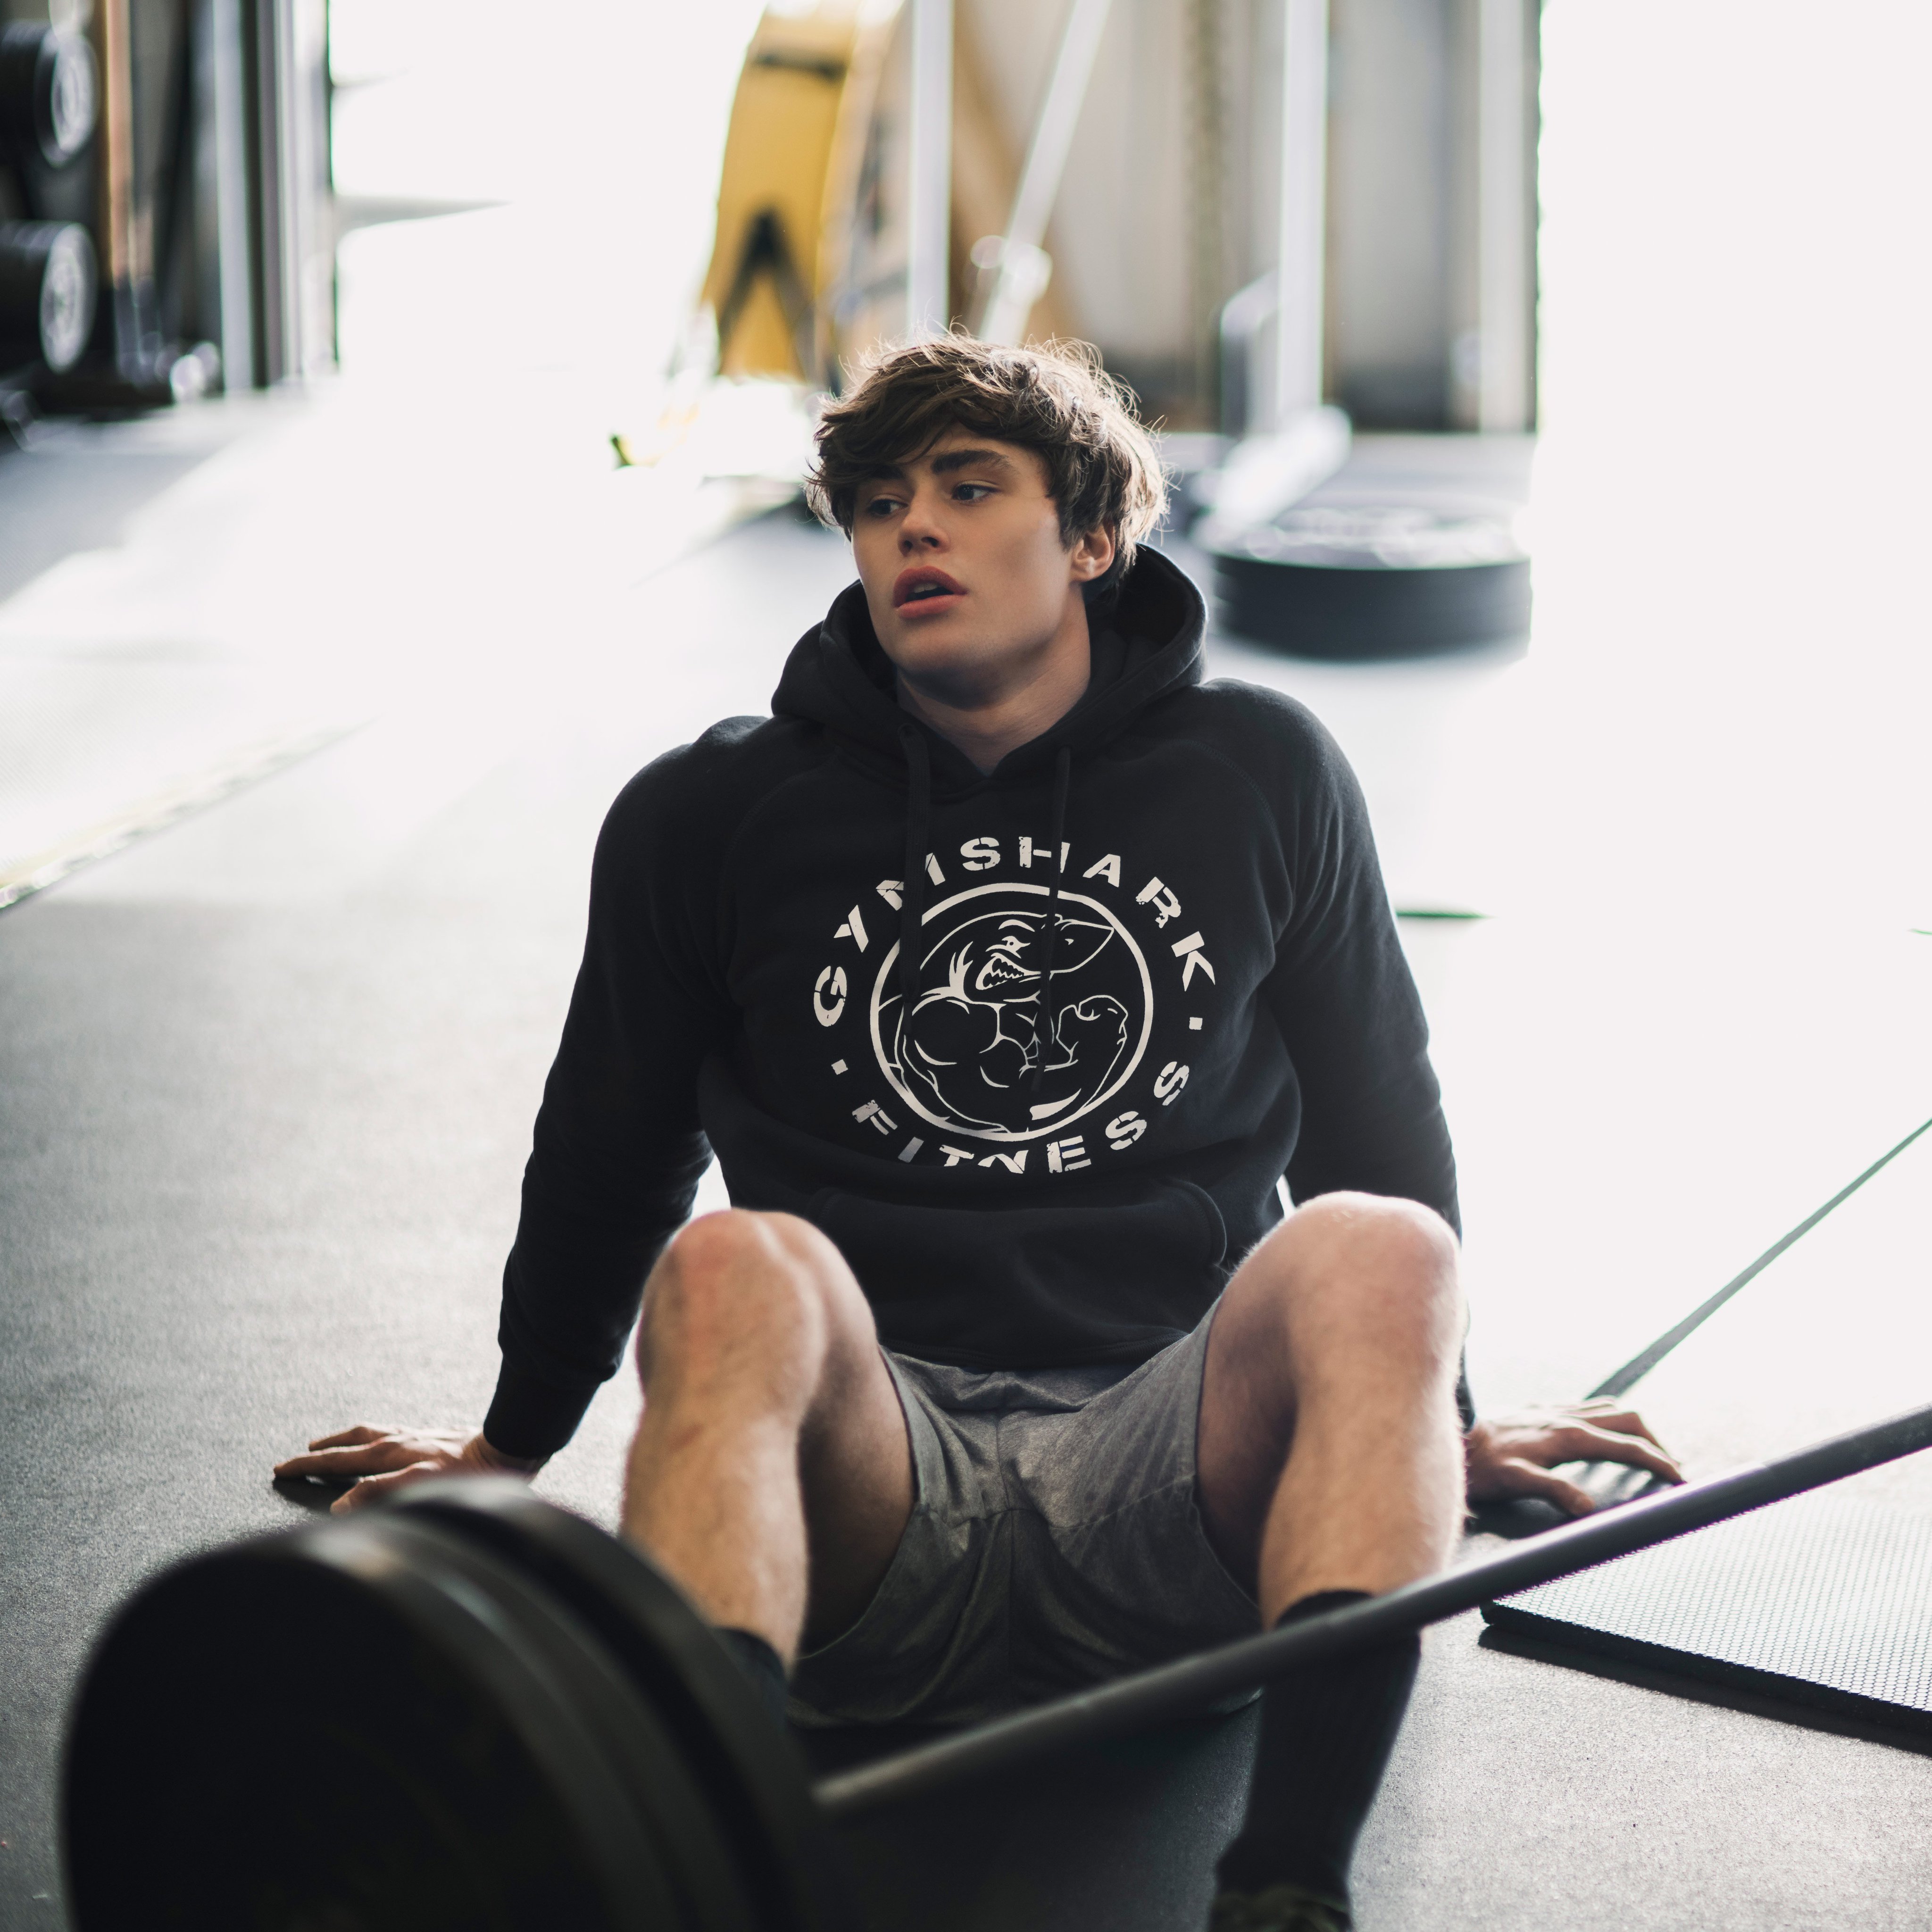 Gymshark on X: Fitness first. David Laid in the Fitness hoodie